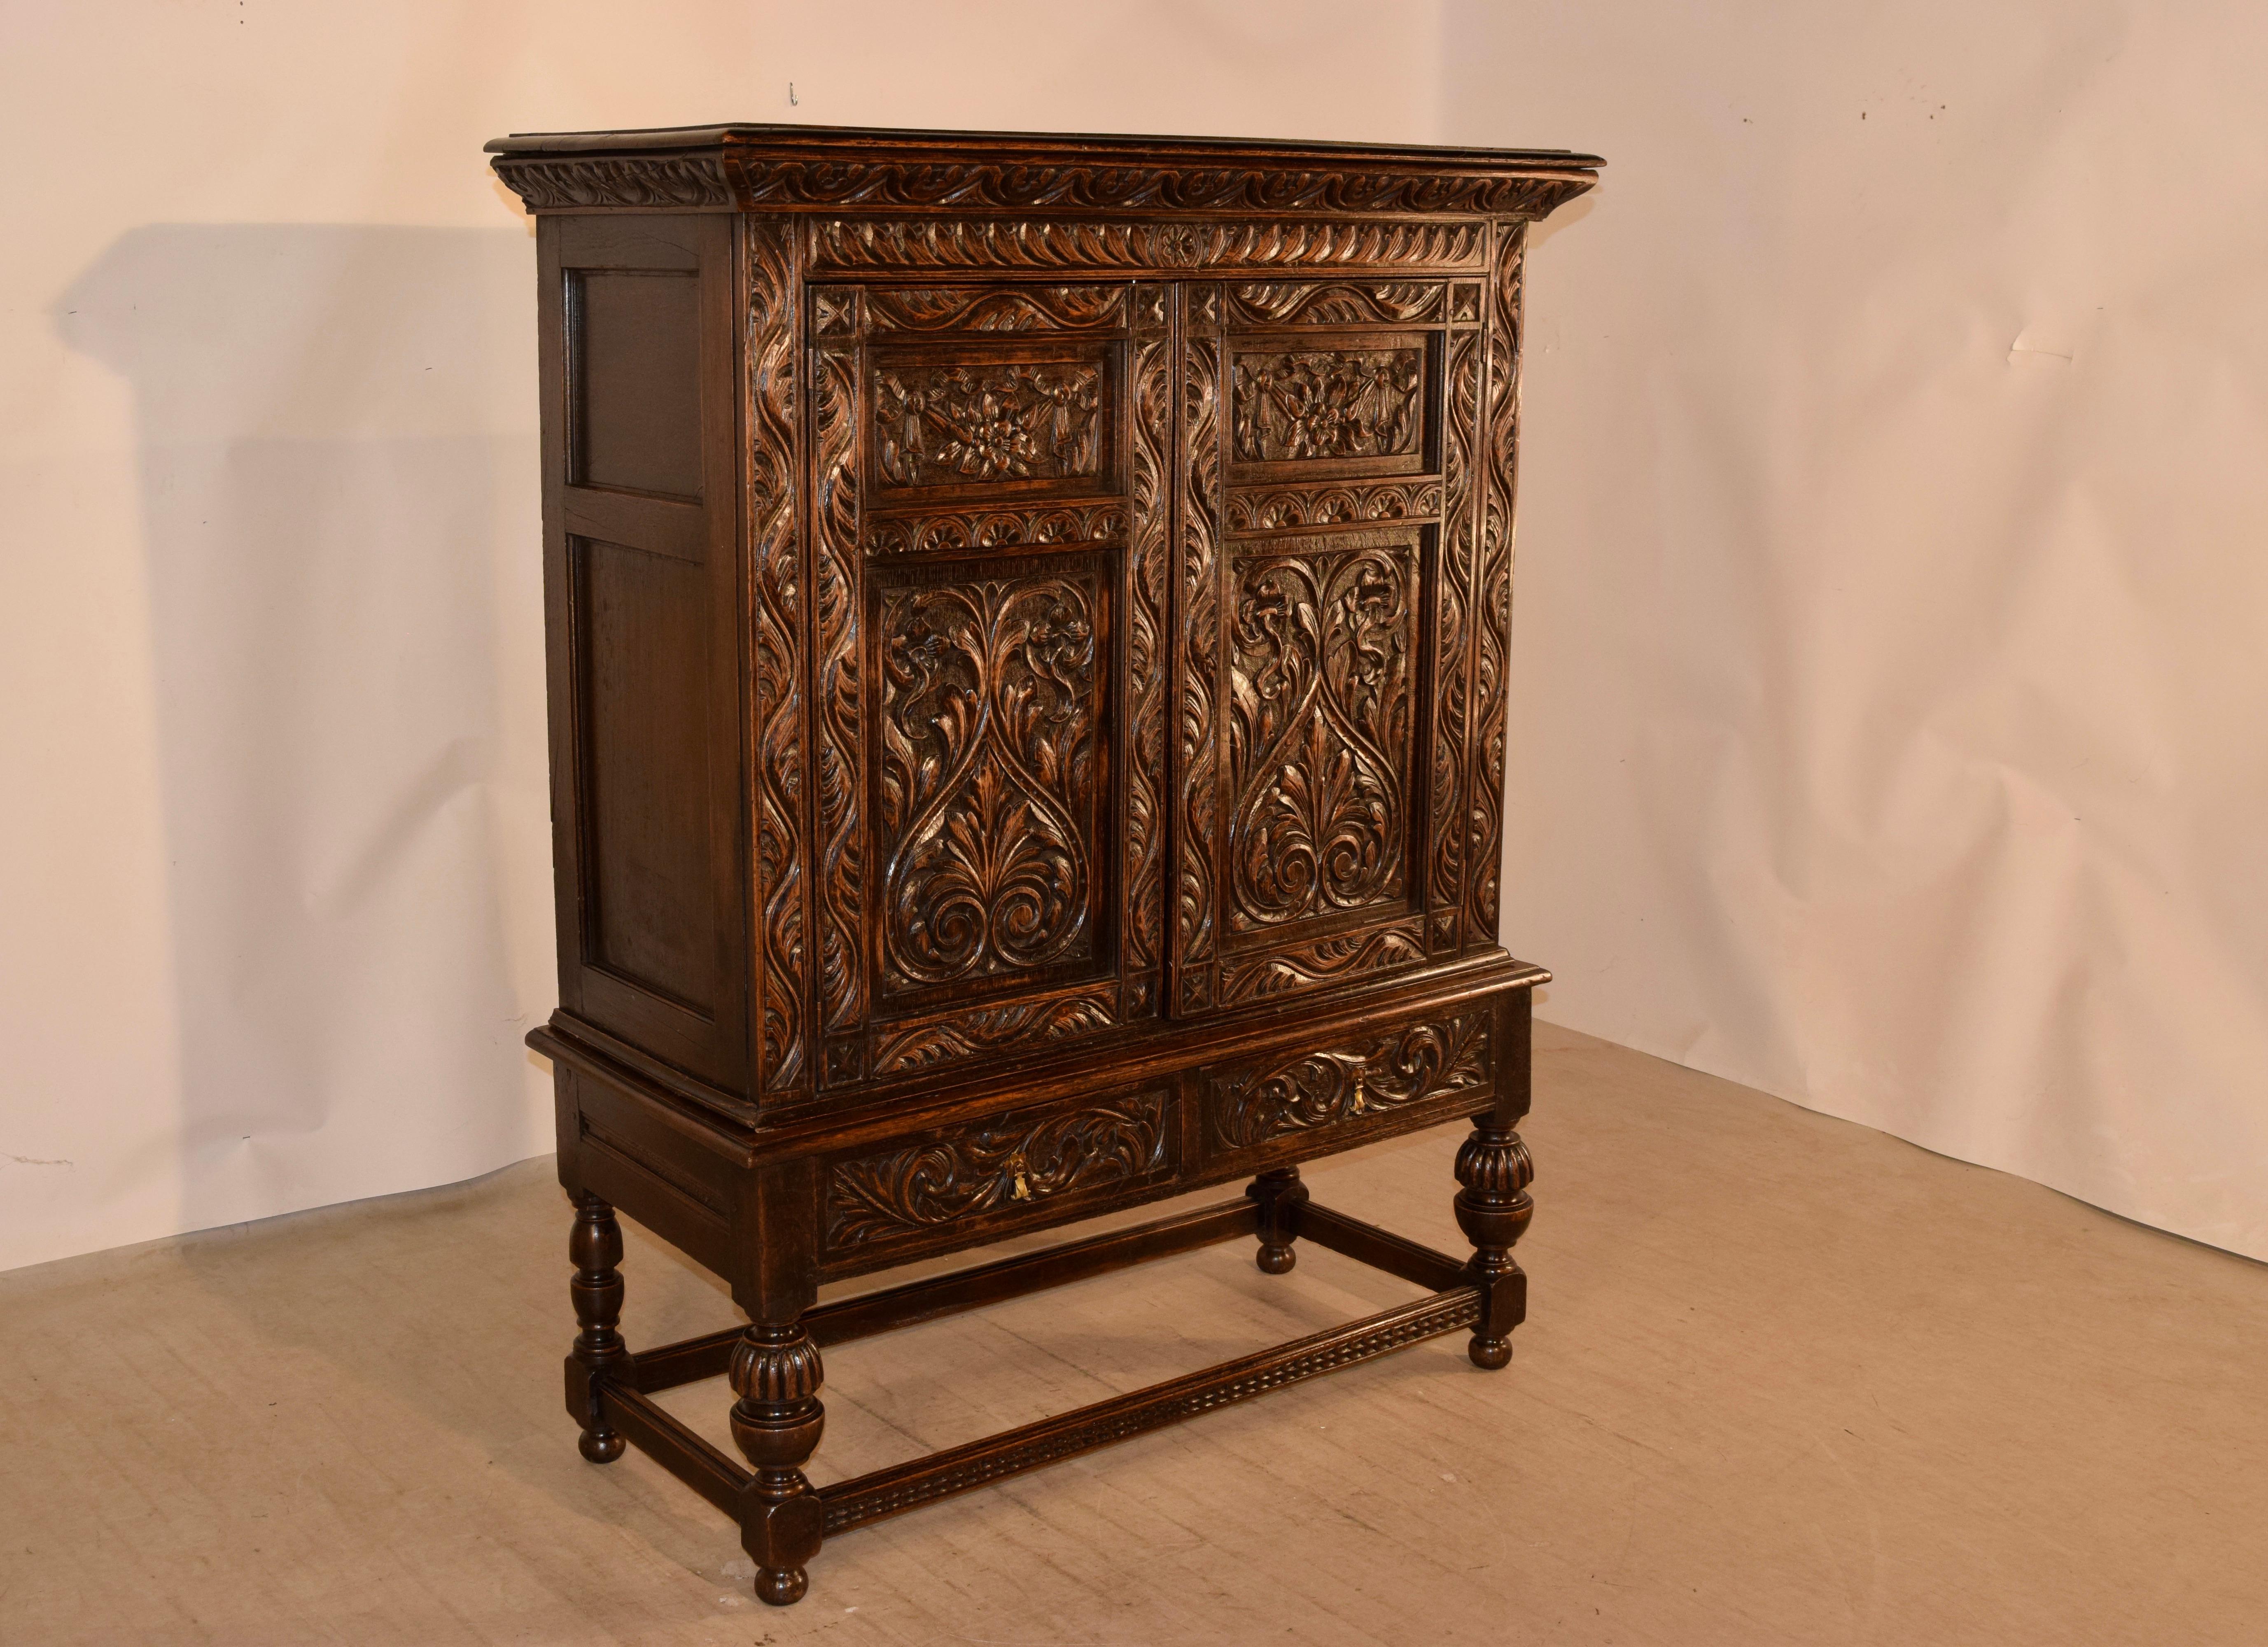 19th century English oak cupboard on stand with a lovely hand carved decorated crown over paneled sides and two carved and paneled doors on the front. The doors open to reveal serpentine shelving. The top rests on a base with paneled sides and two